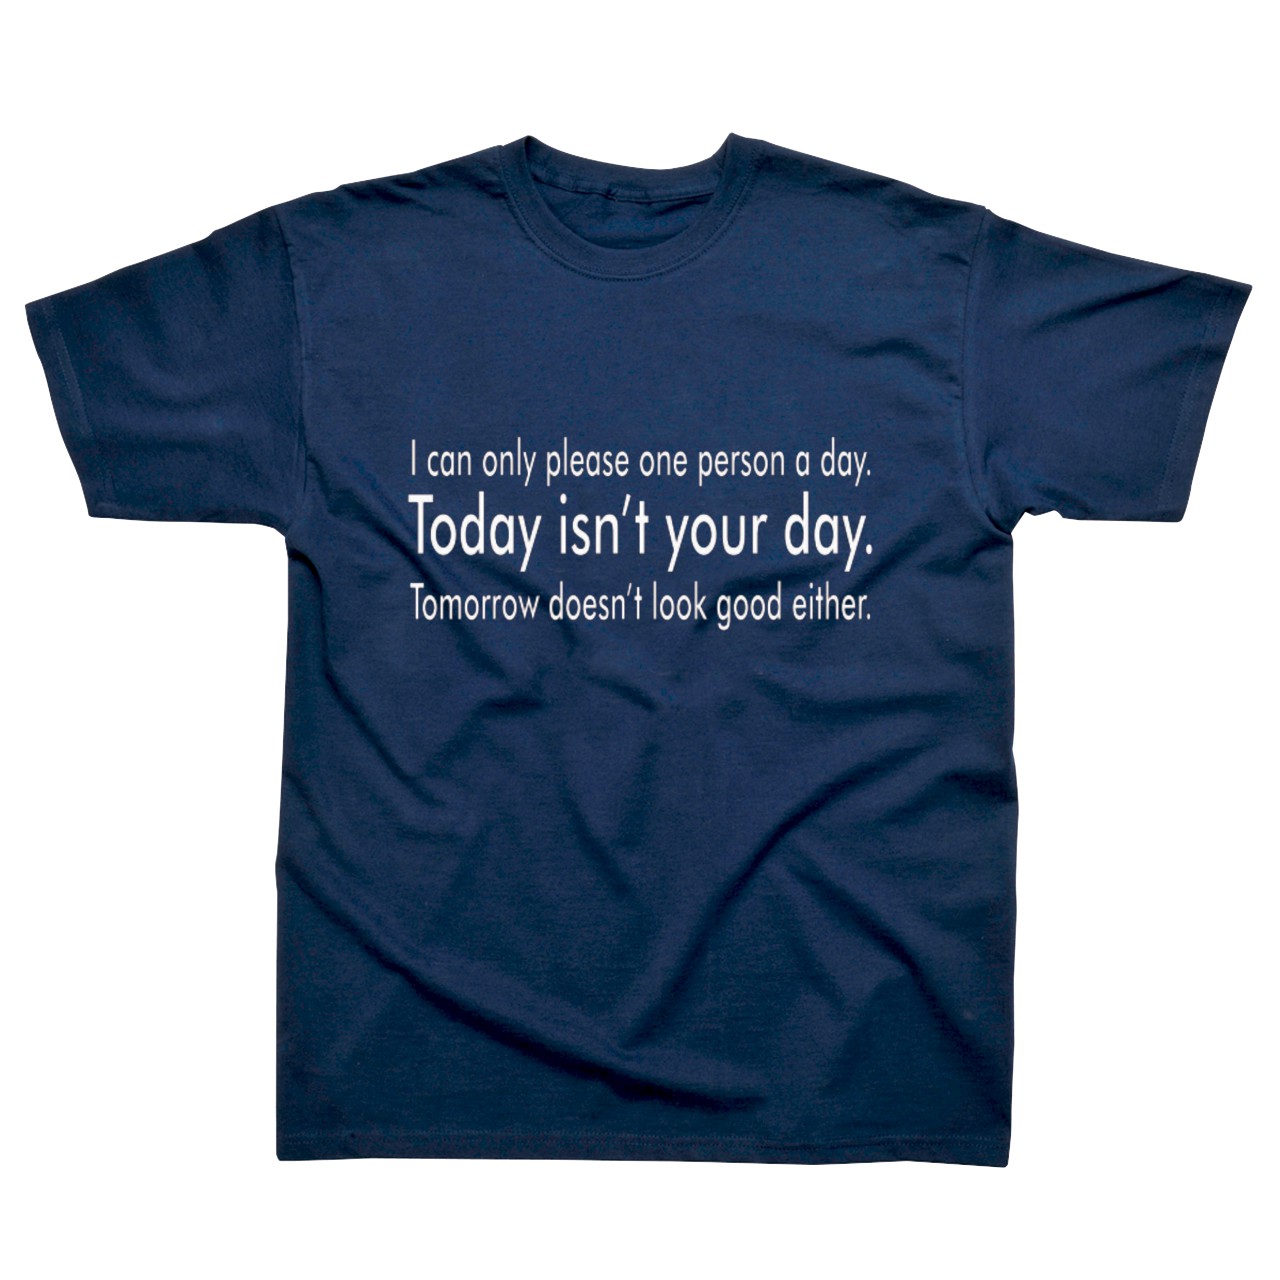 Slogan T-shirt - I can Only Please One Person a Day